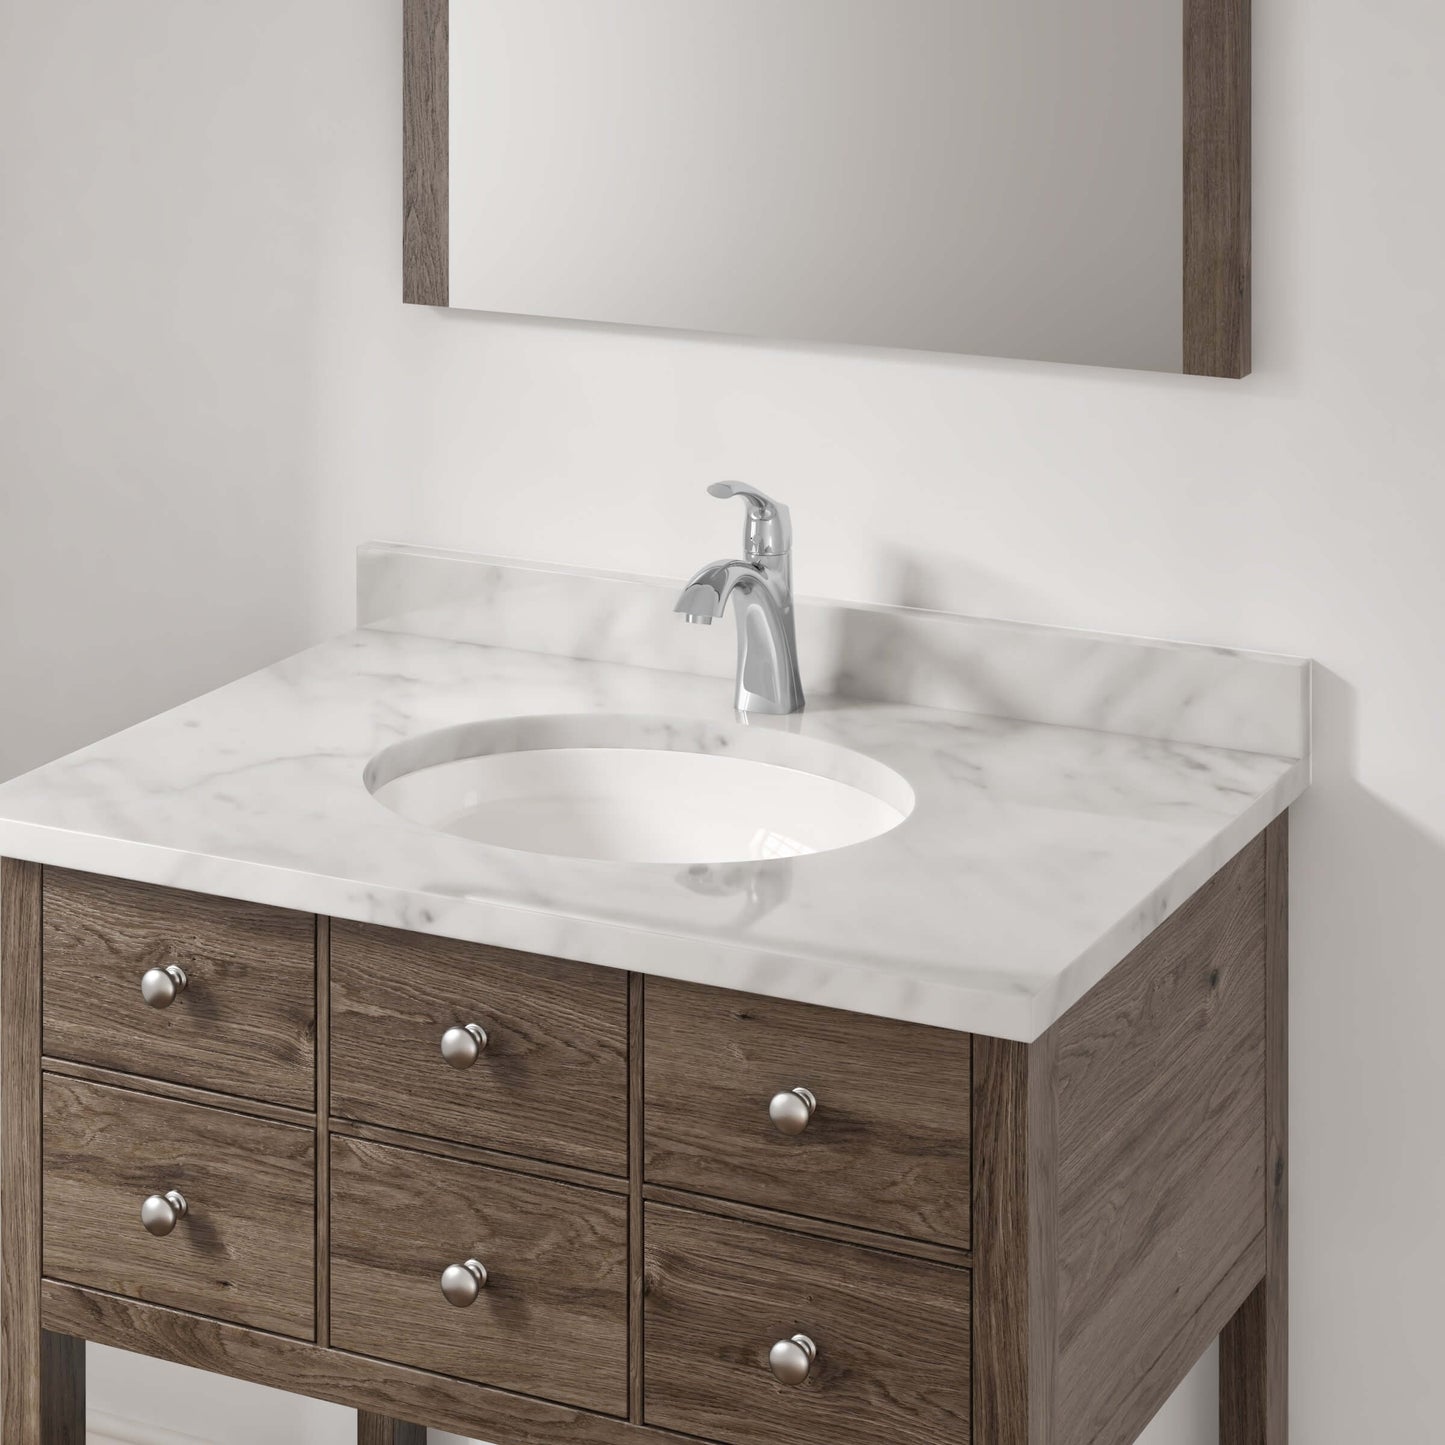 Single handle faucet is mounted on white marble granite with wooden cabinet